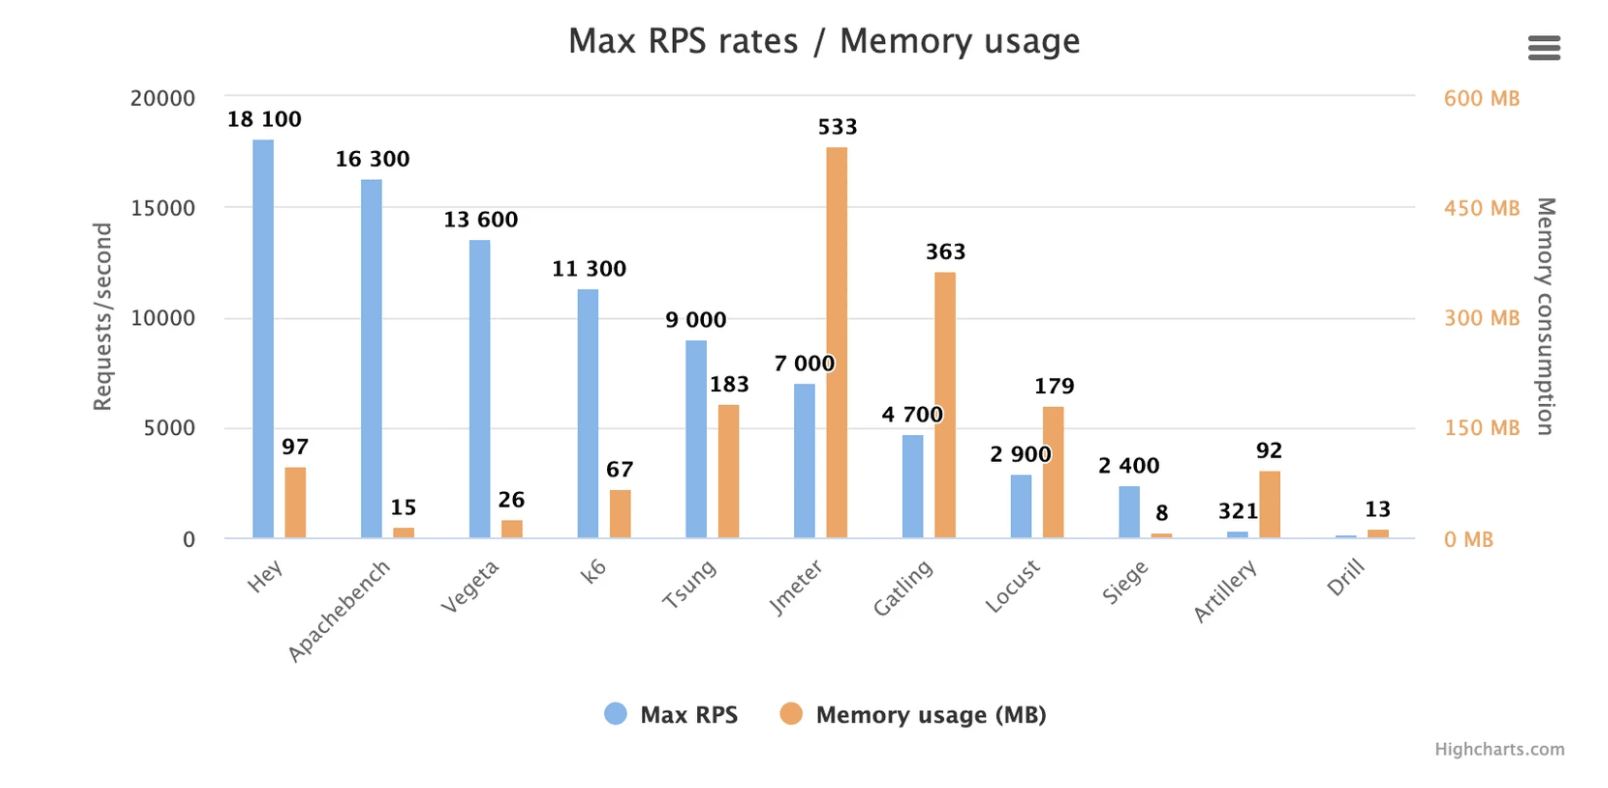 A bar chart compares max RPS rates and memory usage for Hey, Apachebench, Vegeta, k6, Tsung, Jmeter, Gatling, Locust, Siege, Artillery, and Drill